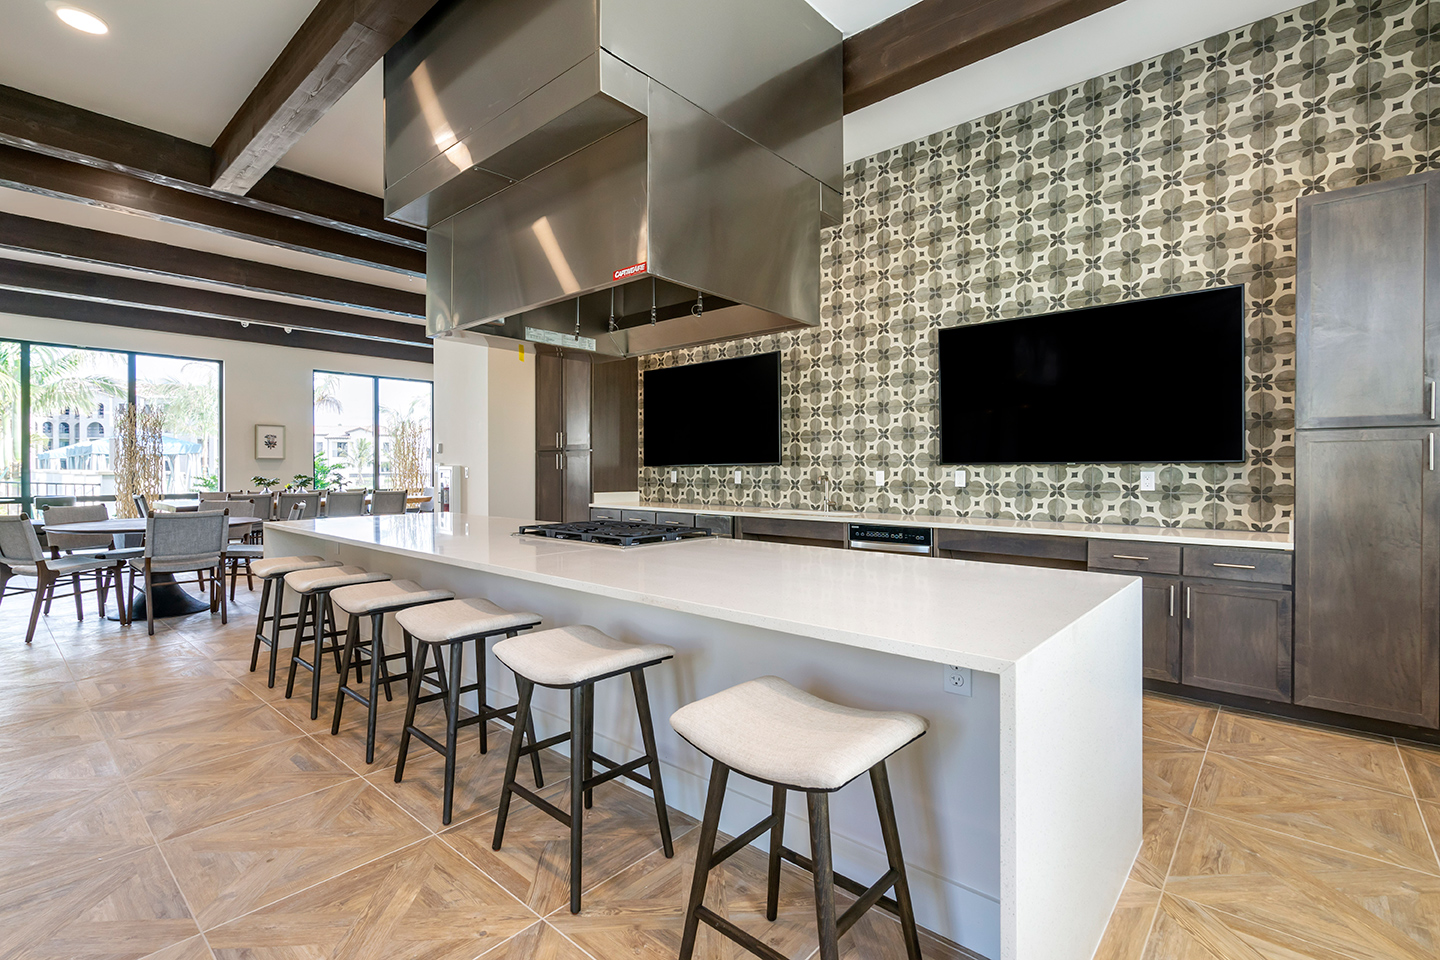 Demonstration kitchen with large TV screens, gas range, cabinets, and barstool seating